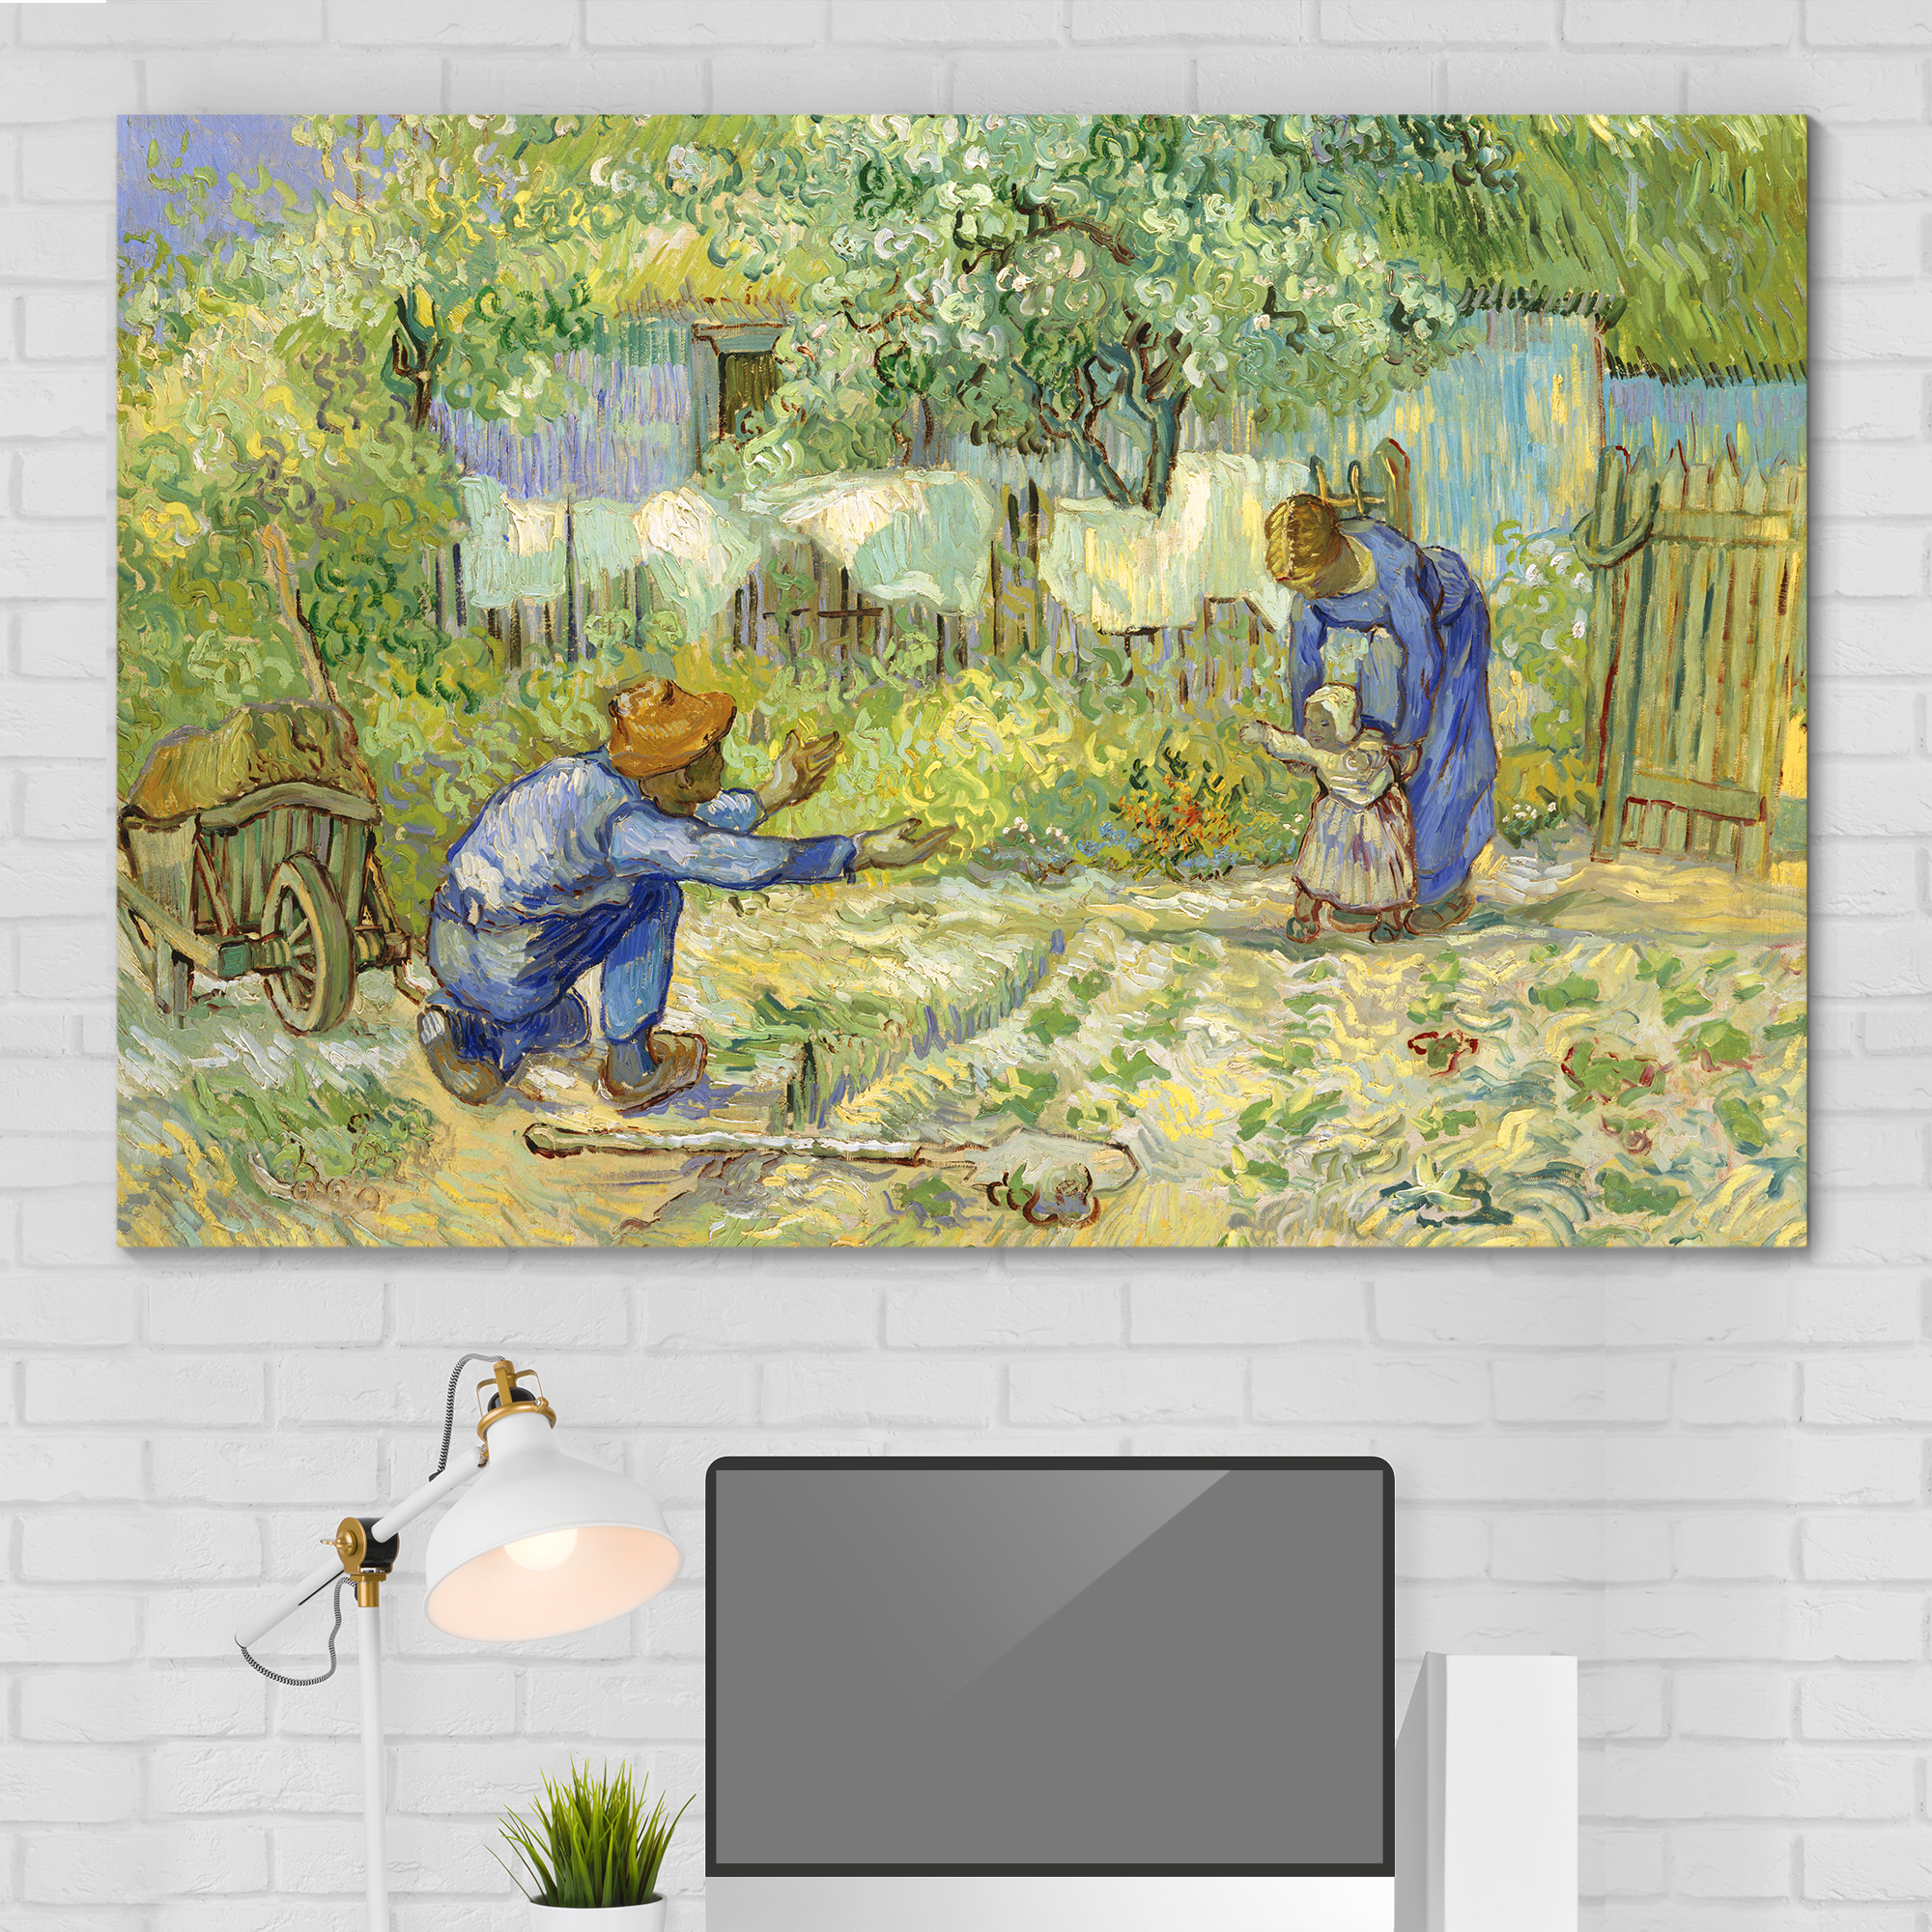 First Steps (after Millet) by Vincent Van Gogh - Oil Painting Reproduction on Canvas Prints Wall Art, Ready to Hang - 32